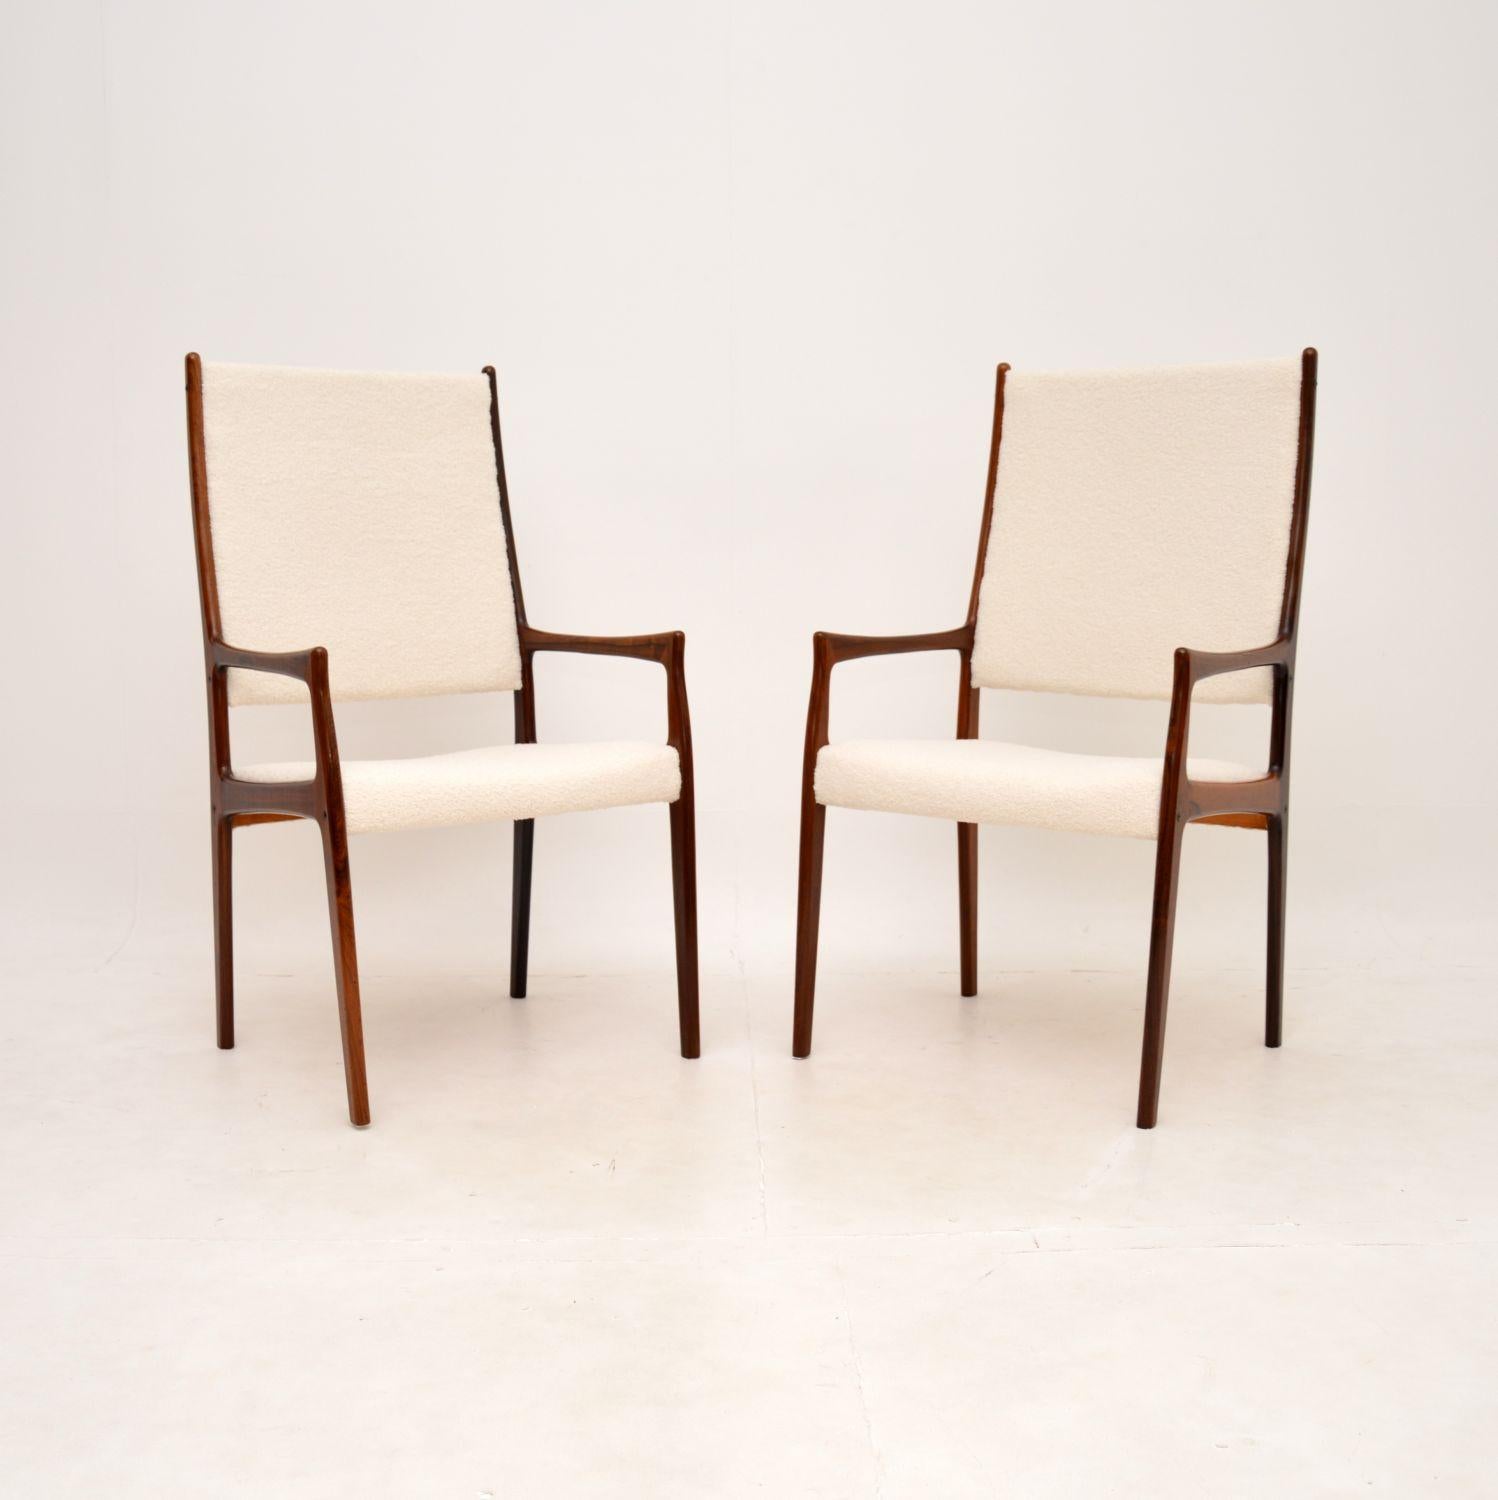 A stunning and very impressive pair of Danish vintage armchairs by Johannes Andersen. They were made in Denmark in the 1960’s.

The quality is outstanding, the frames have absolutely gorgeous grain patterns and colour tones. The frames have a